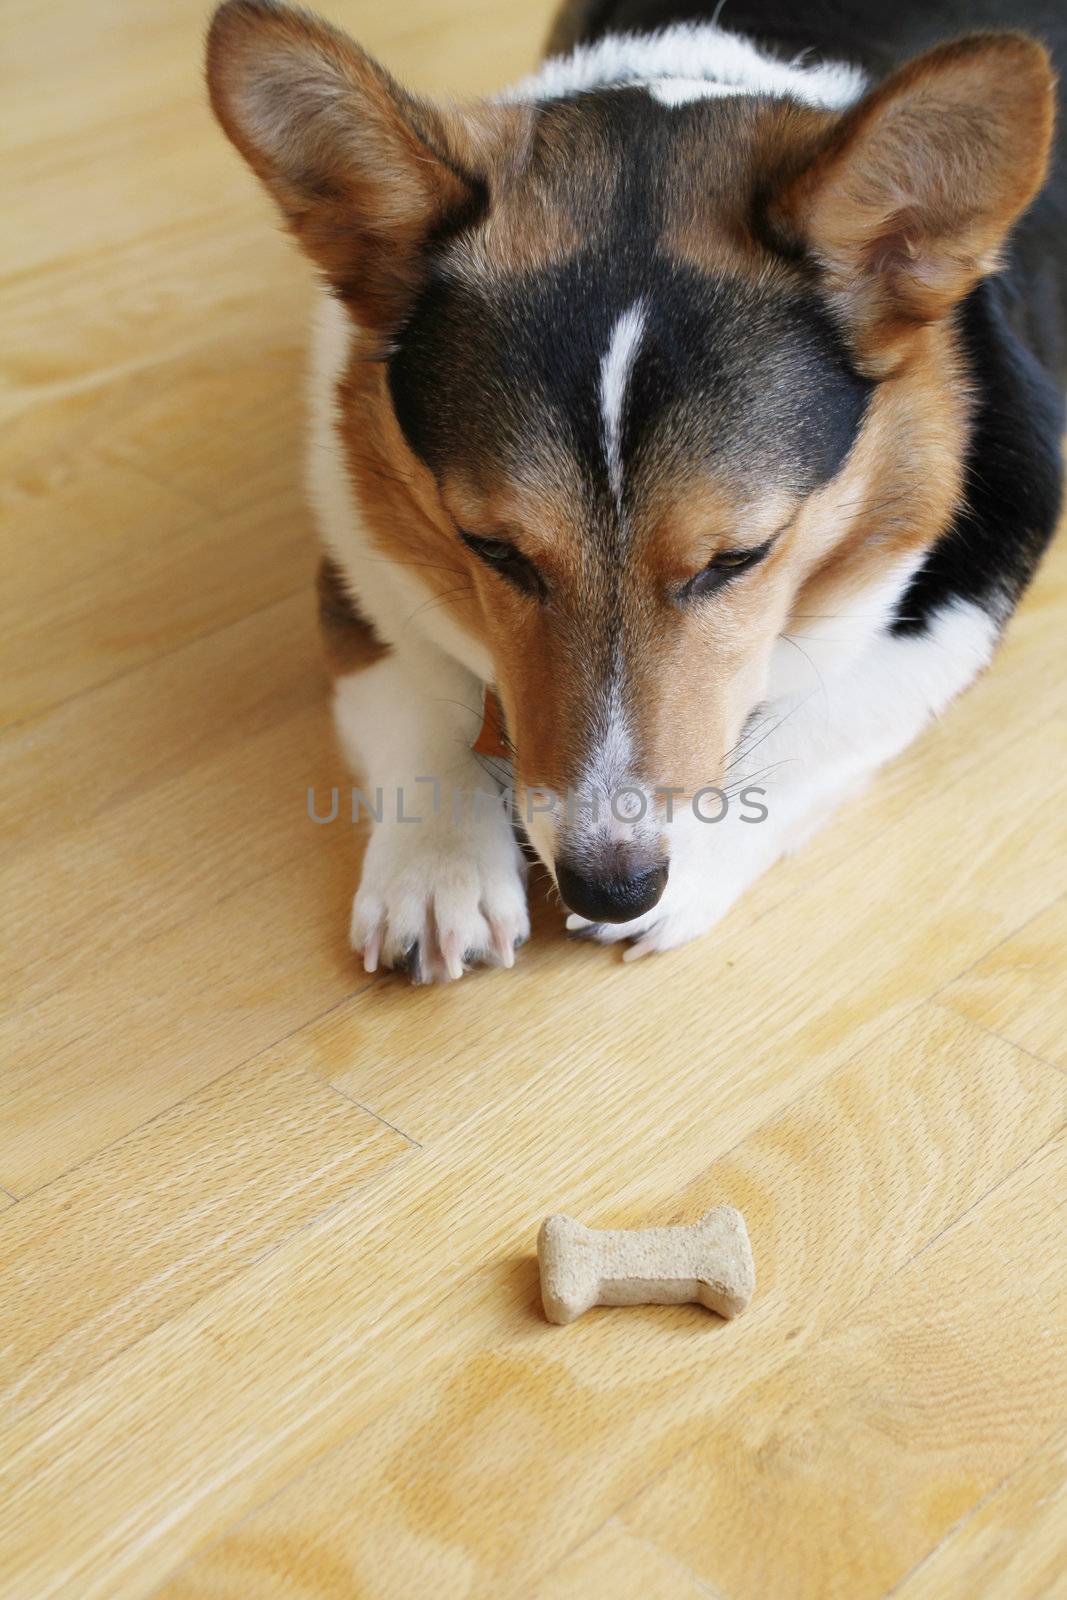 An obedient Pembroke Welsh Corgi waiting on command to eat the treat.